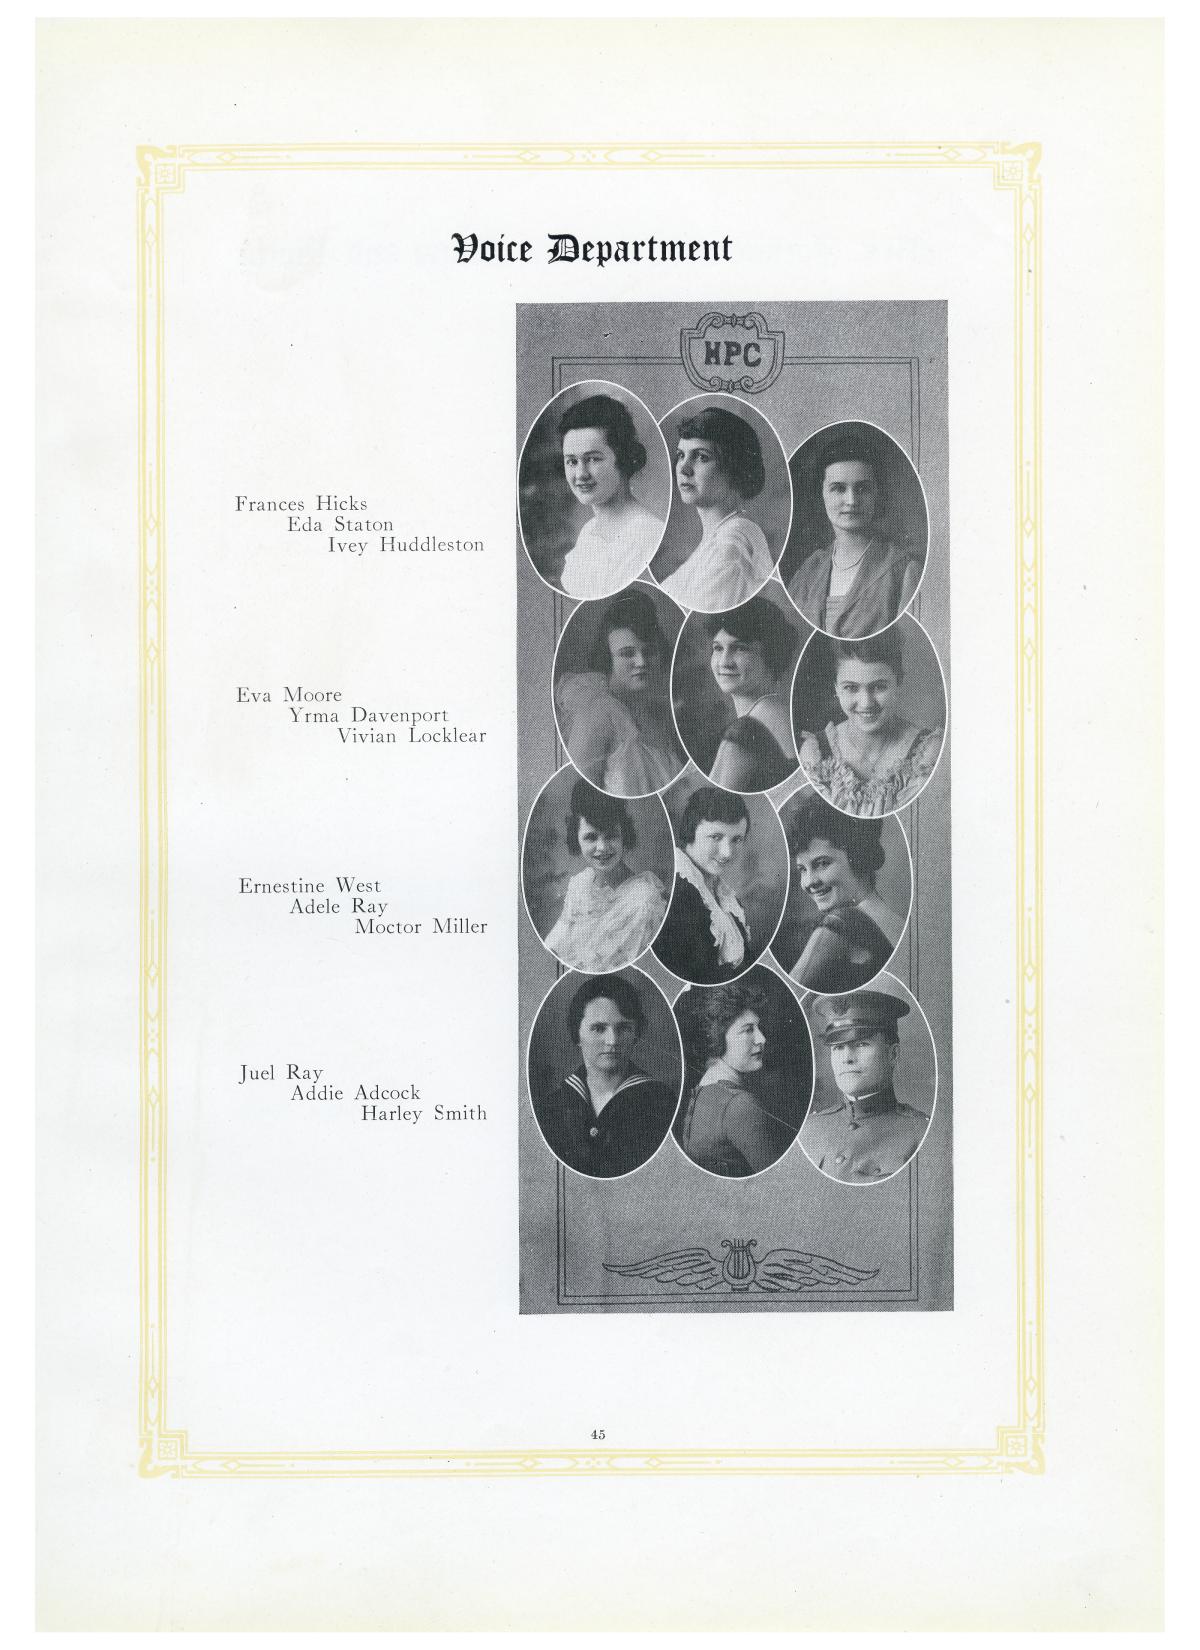 The Lasso, Yearbook of Howard Payne College, 1919
                                                
                                                    45
                                                